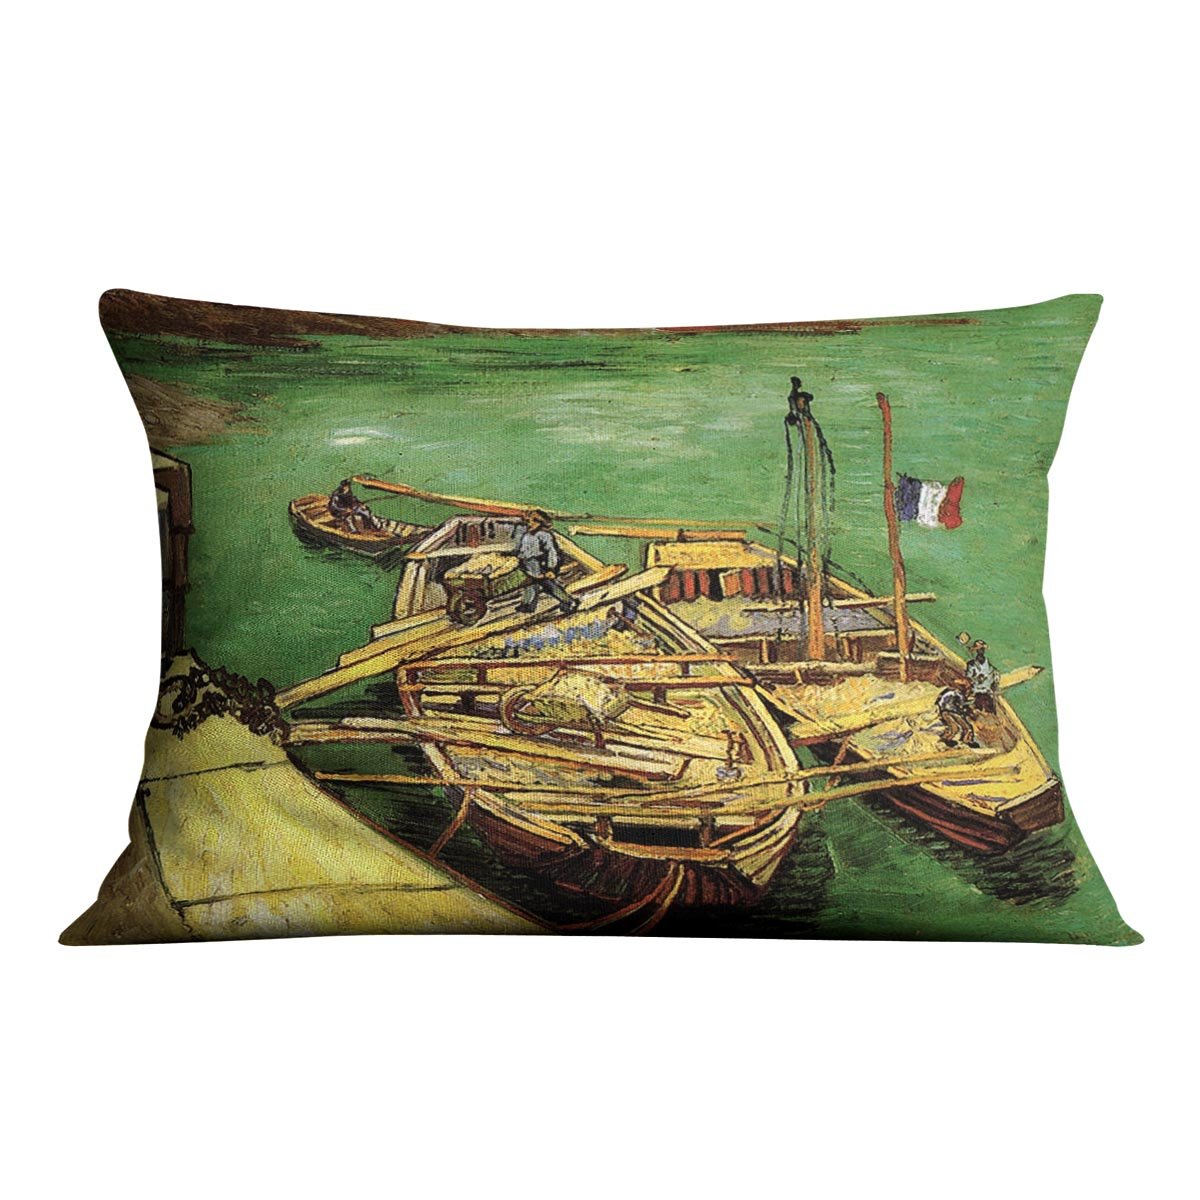 Quay with Men Unloading Sand Barges by Van Gogh Throw Pillow